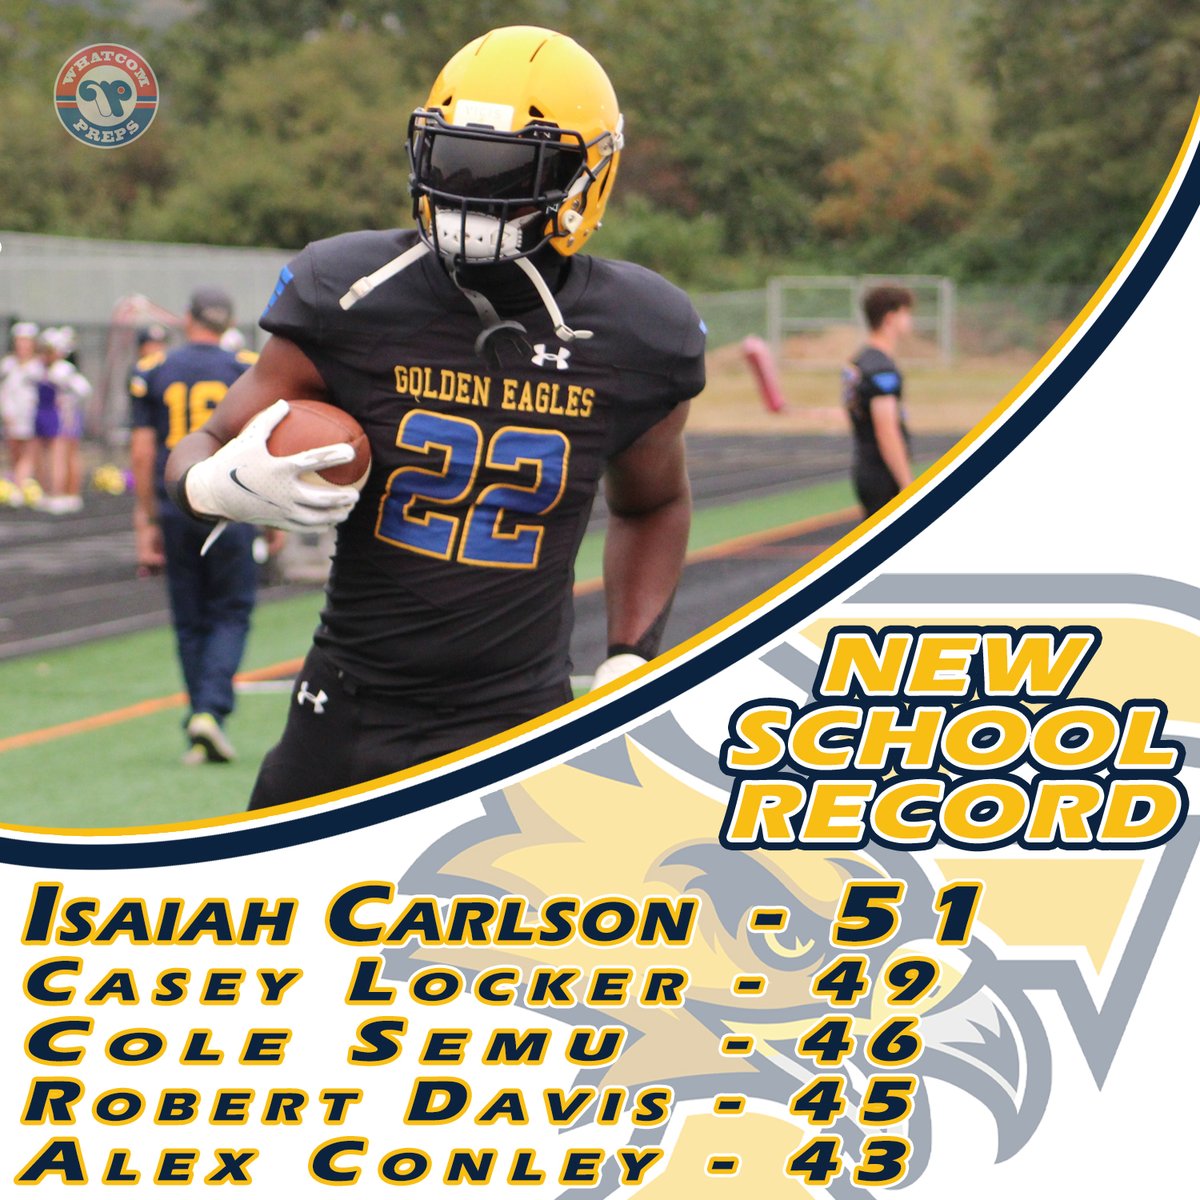 Congratulations to @FerndaleFB senior running back @IsaiahCarlson4 on breaking the school record for most career rushing touchdowns!